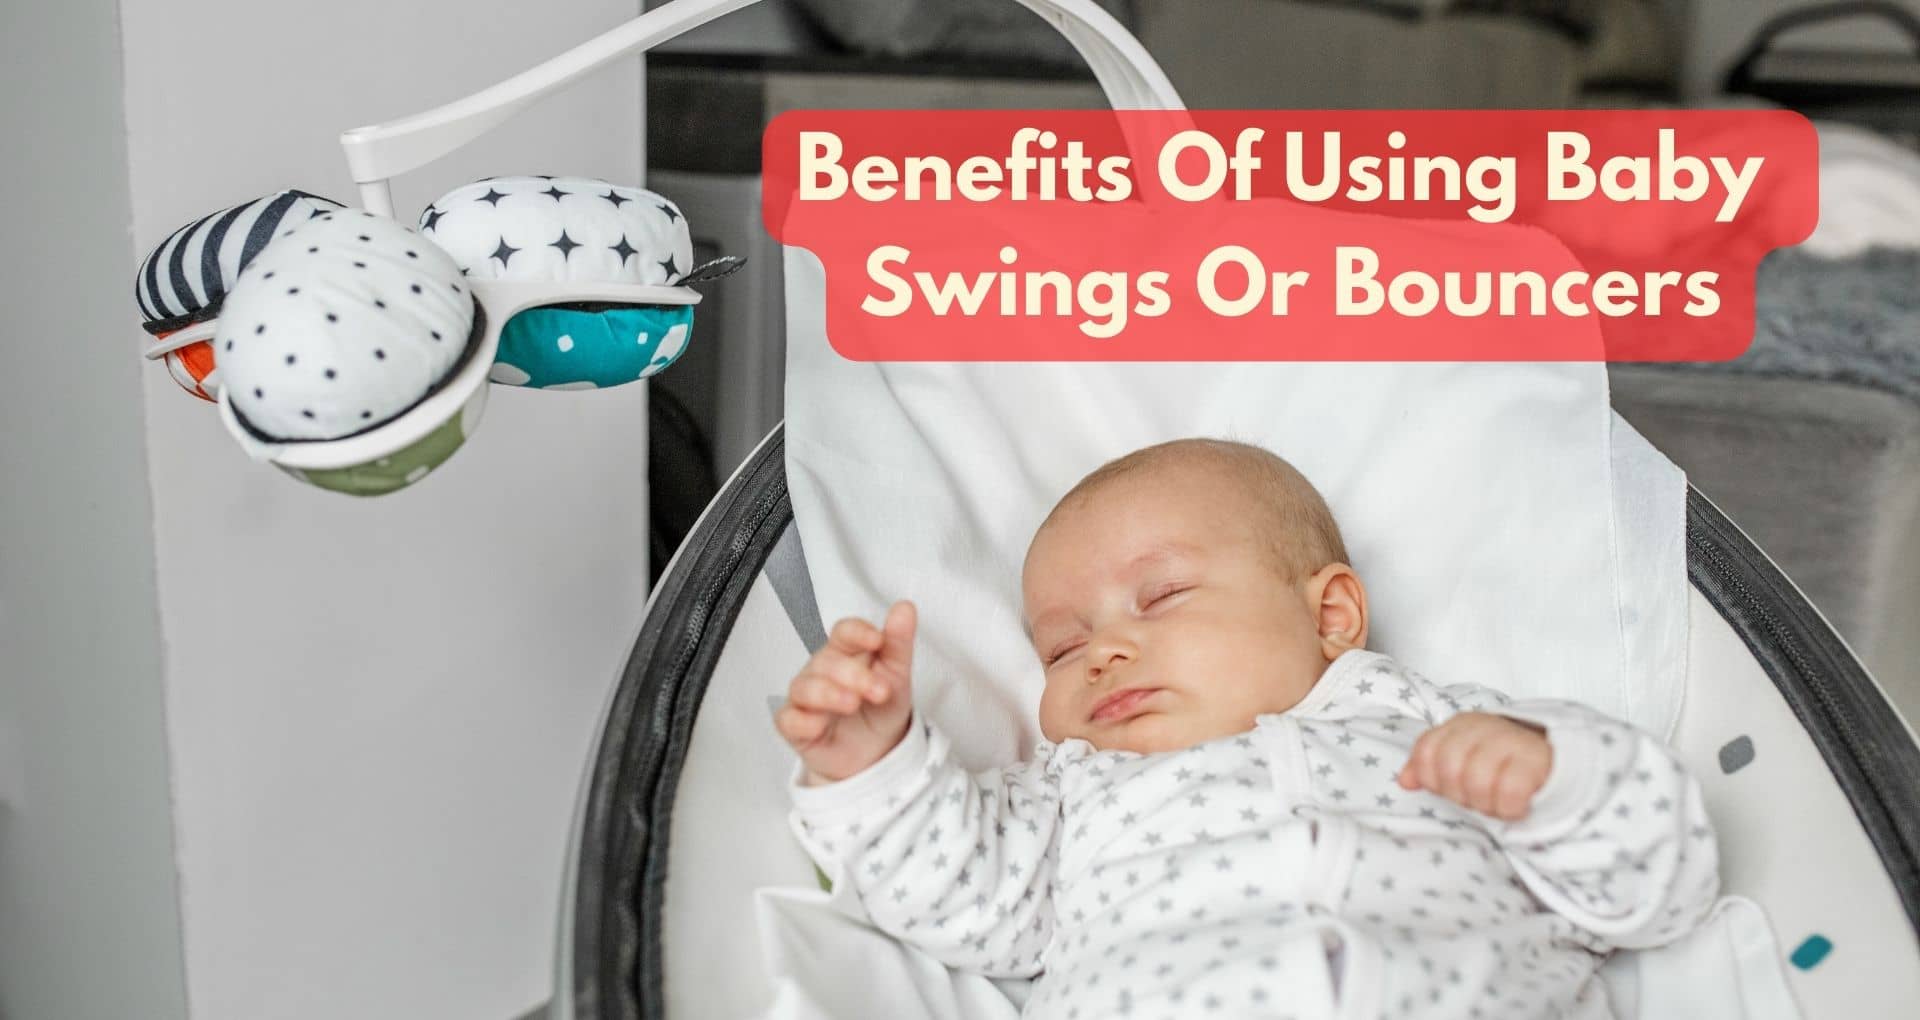 What Are The Benefits Of Using Baby Swings Or Bouncers?